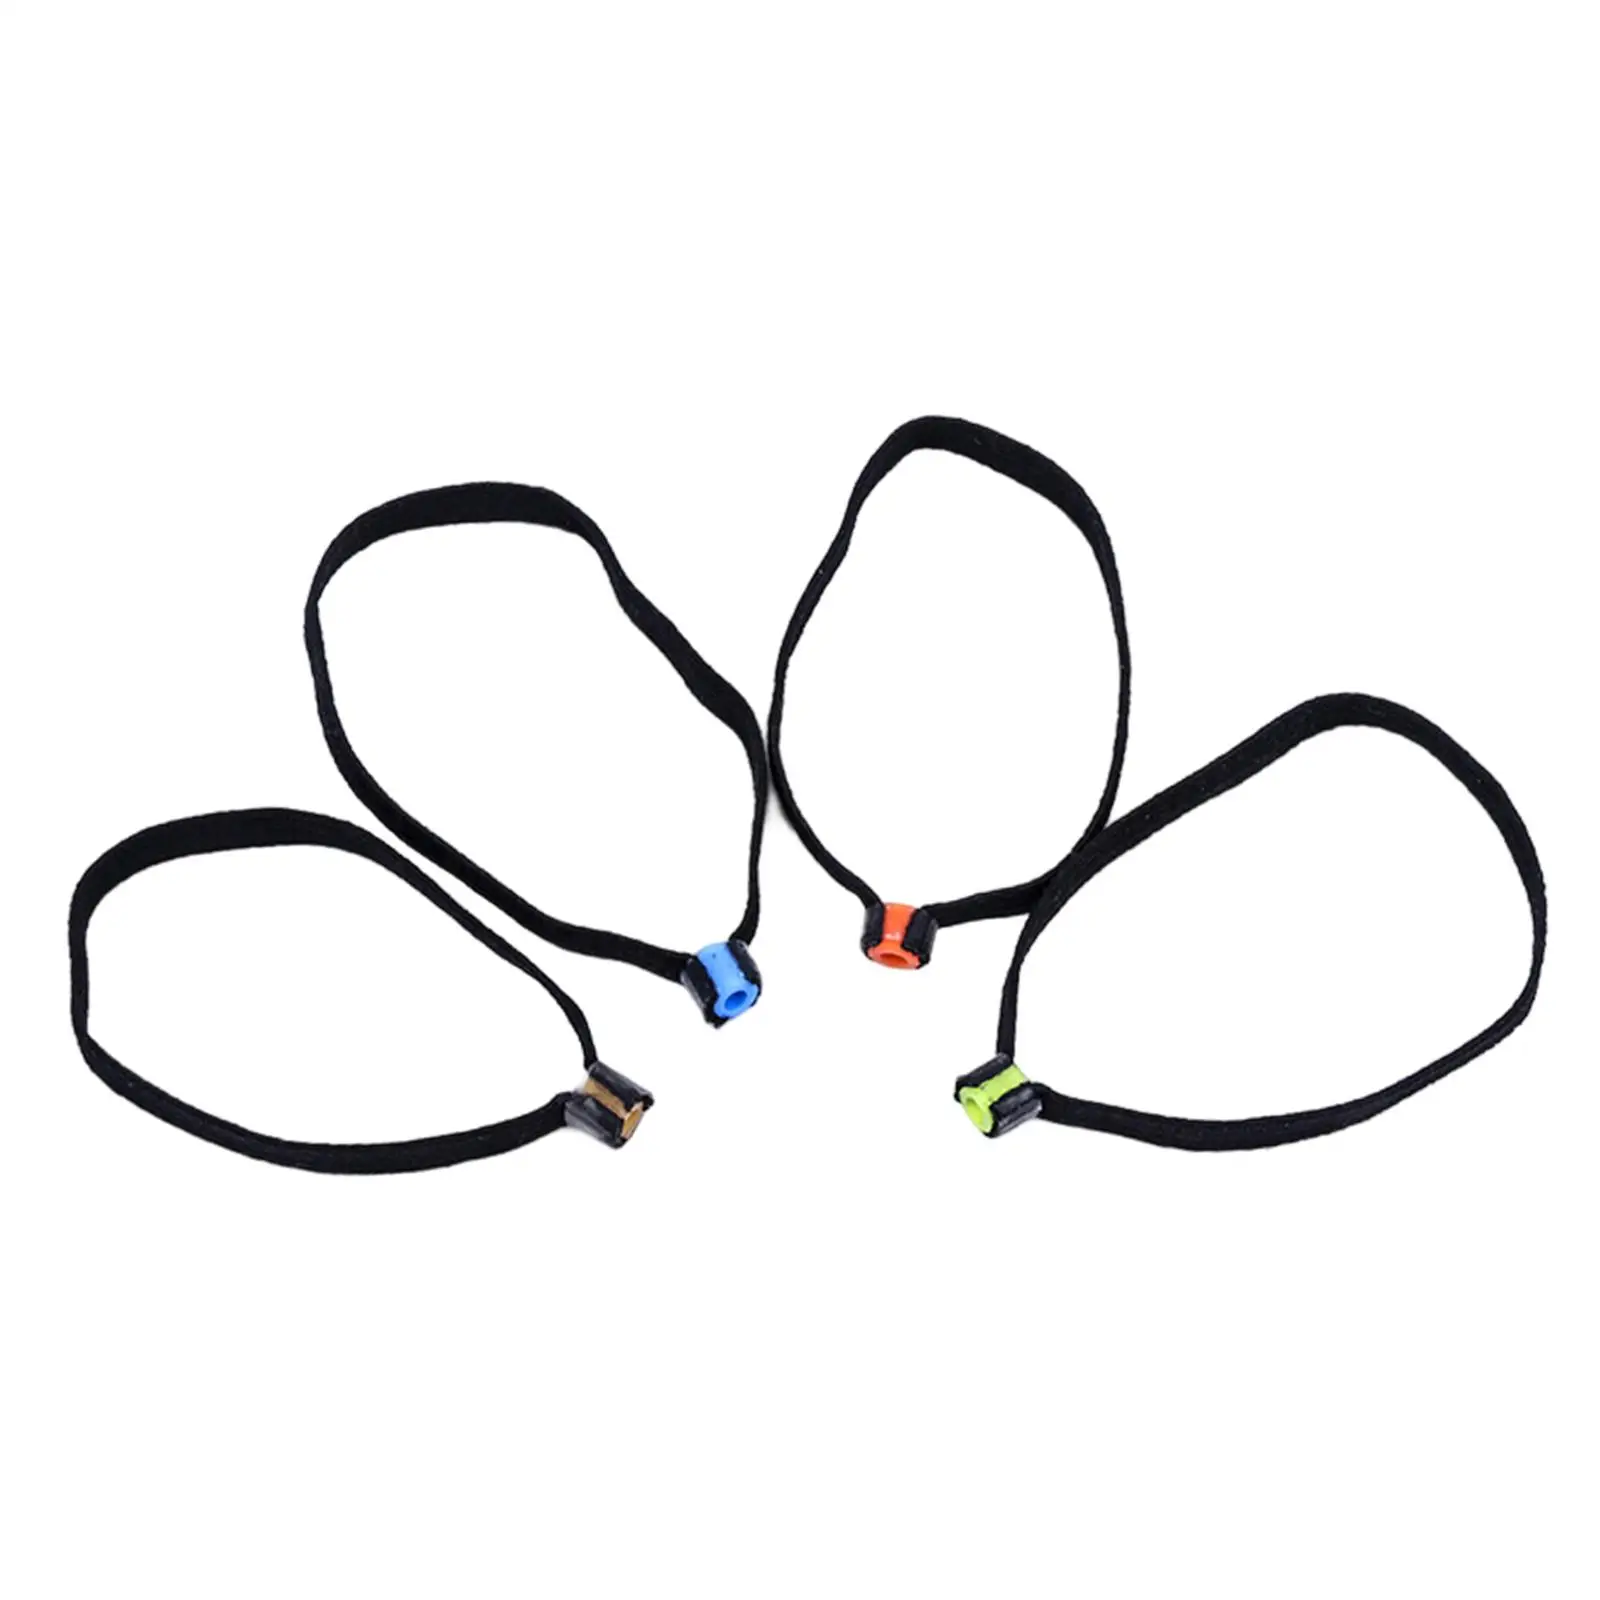 Tippet Spool Tenders Tippet Rings Lightweight Multifunction Portable Essential for Outdoor Sports Fishing Tackle Attachments